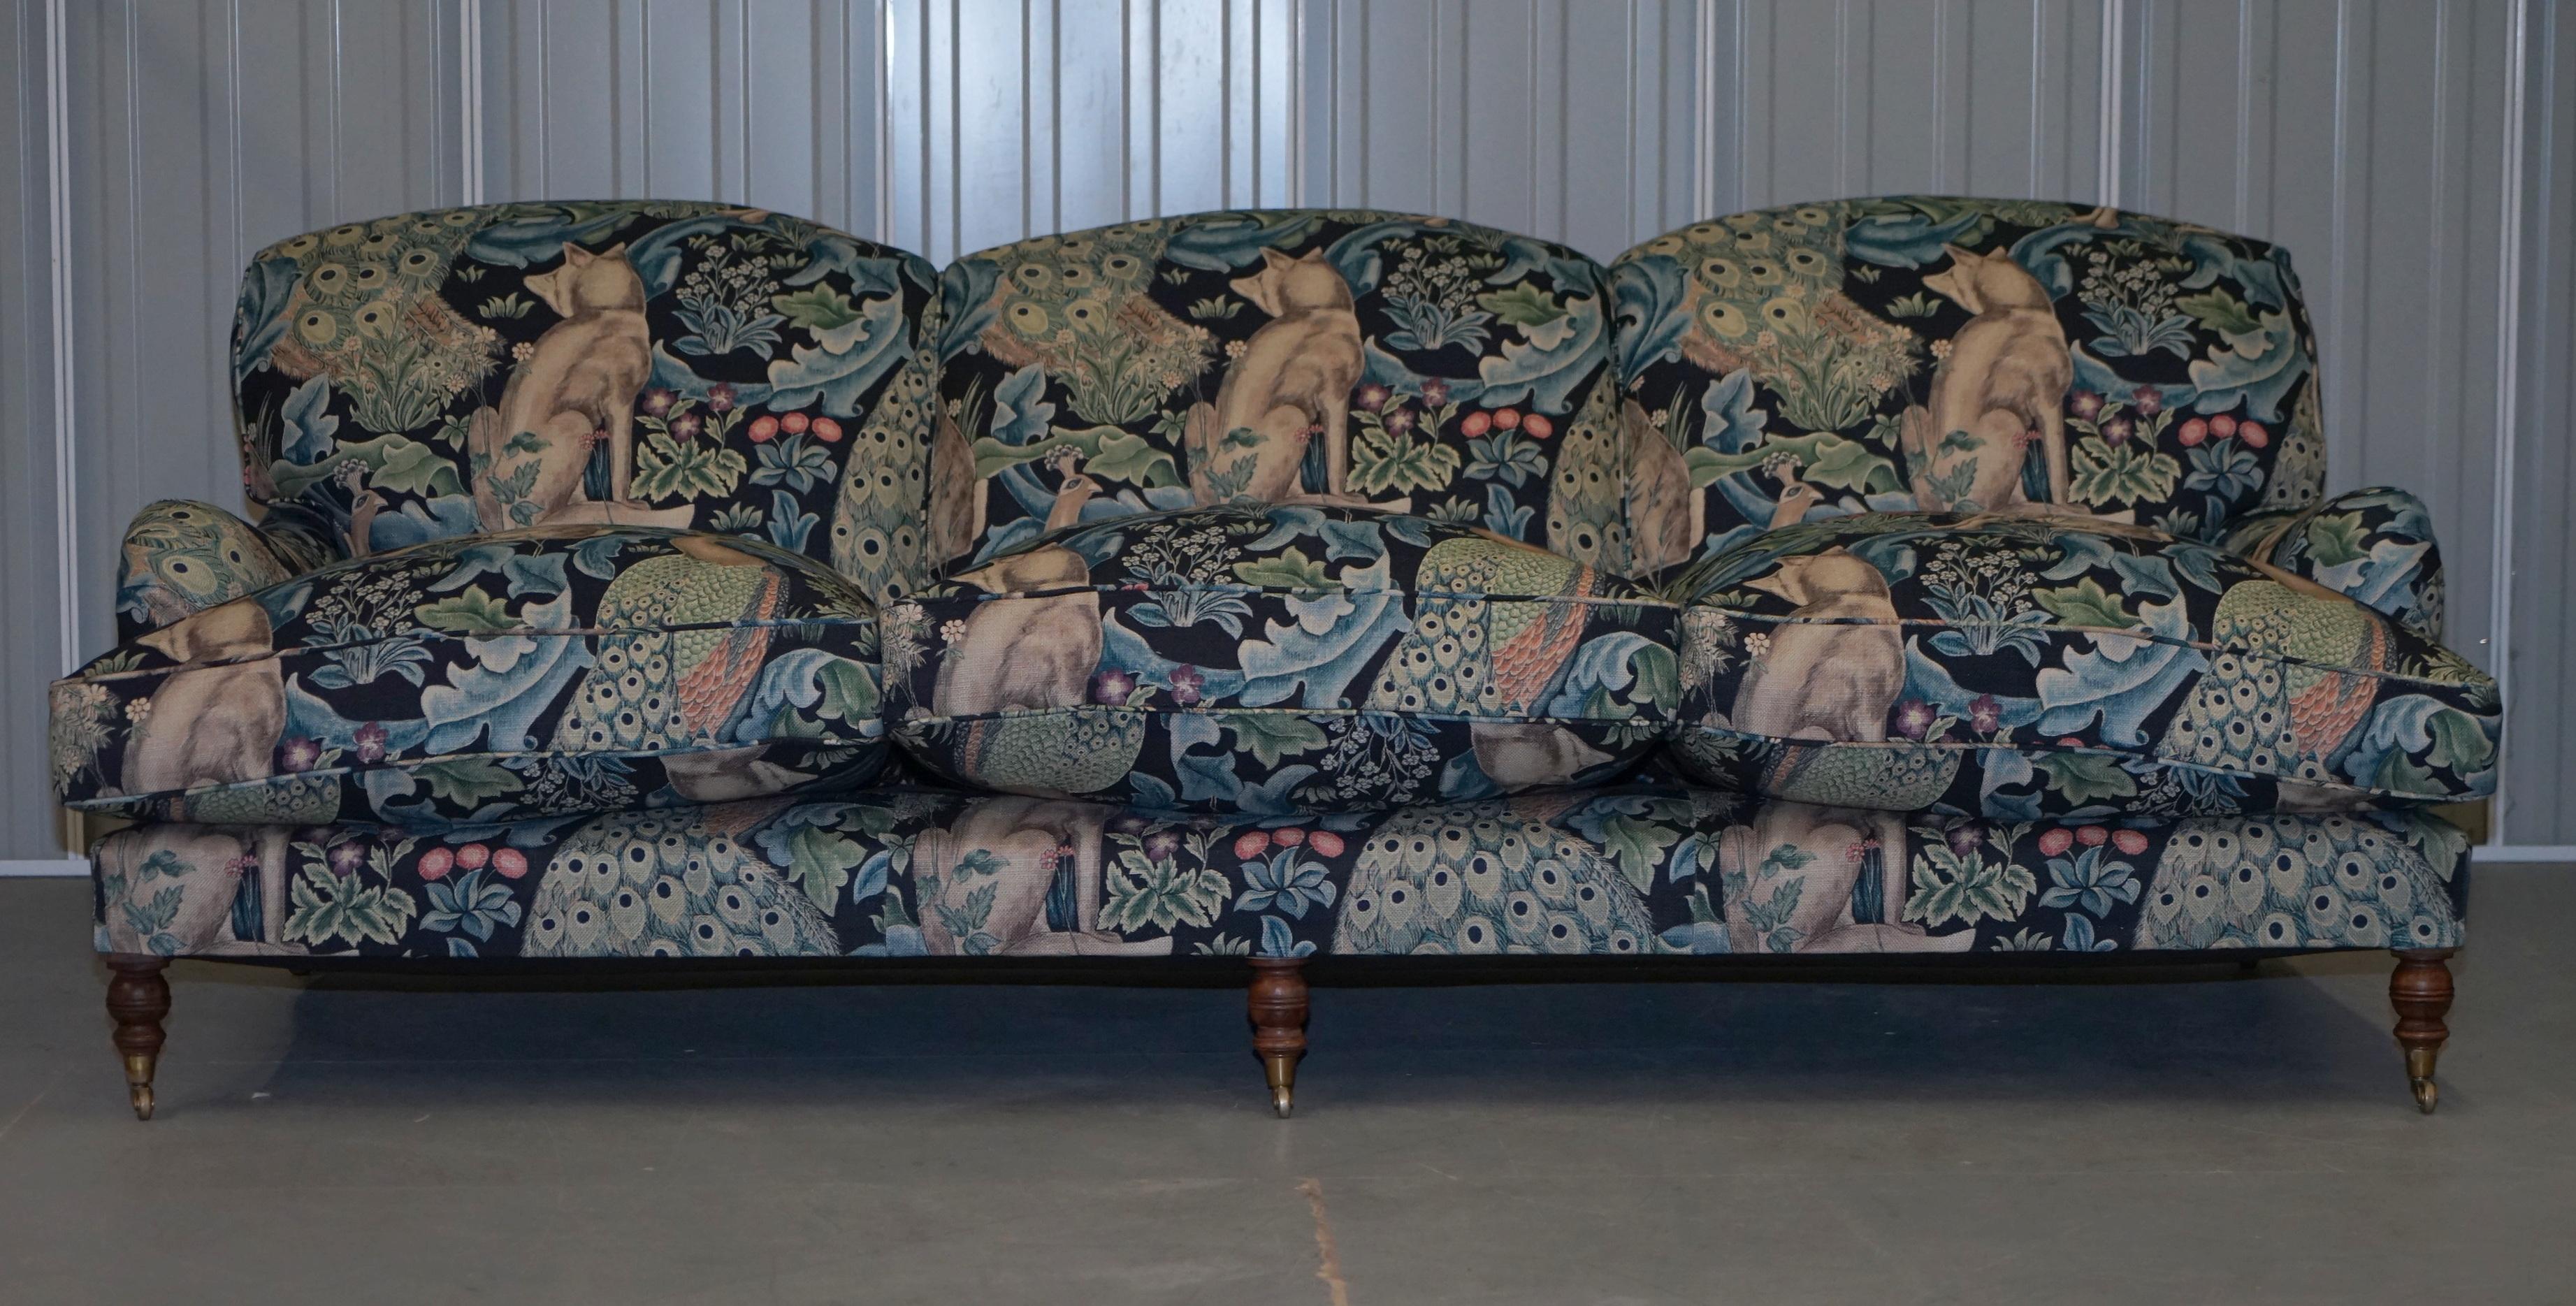 Wimbledon-Furniture

Wimbledon-Furniture is delighted to offer for sale this lovely custom made newly reupholstered George Smith signature arm sofa with William Morris Forest Linen upholstery

Please note the delivery fee listed is just a guide,